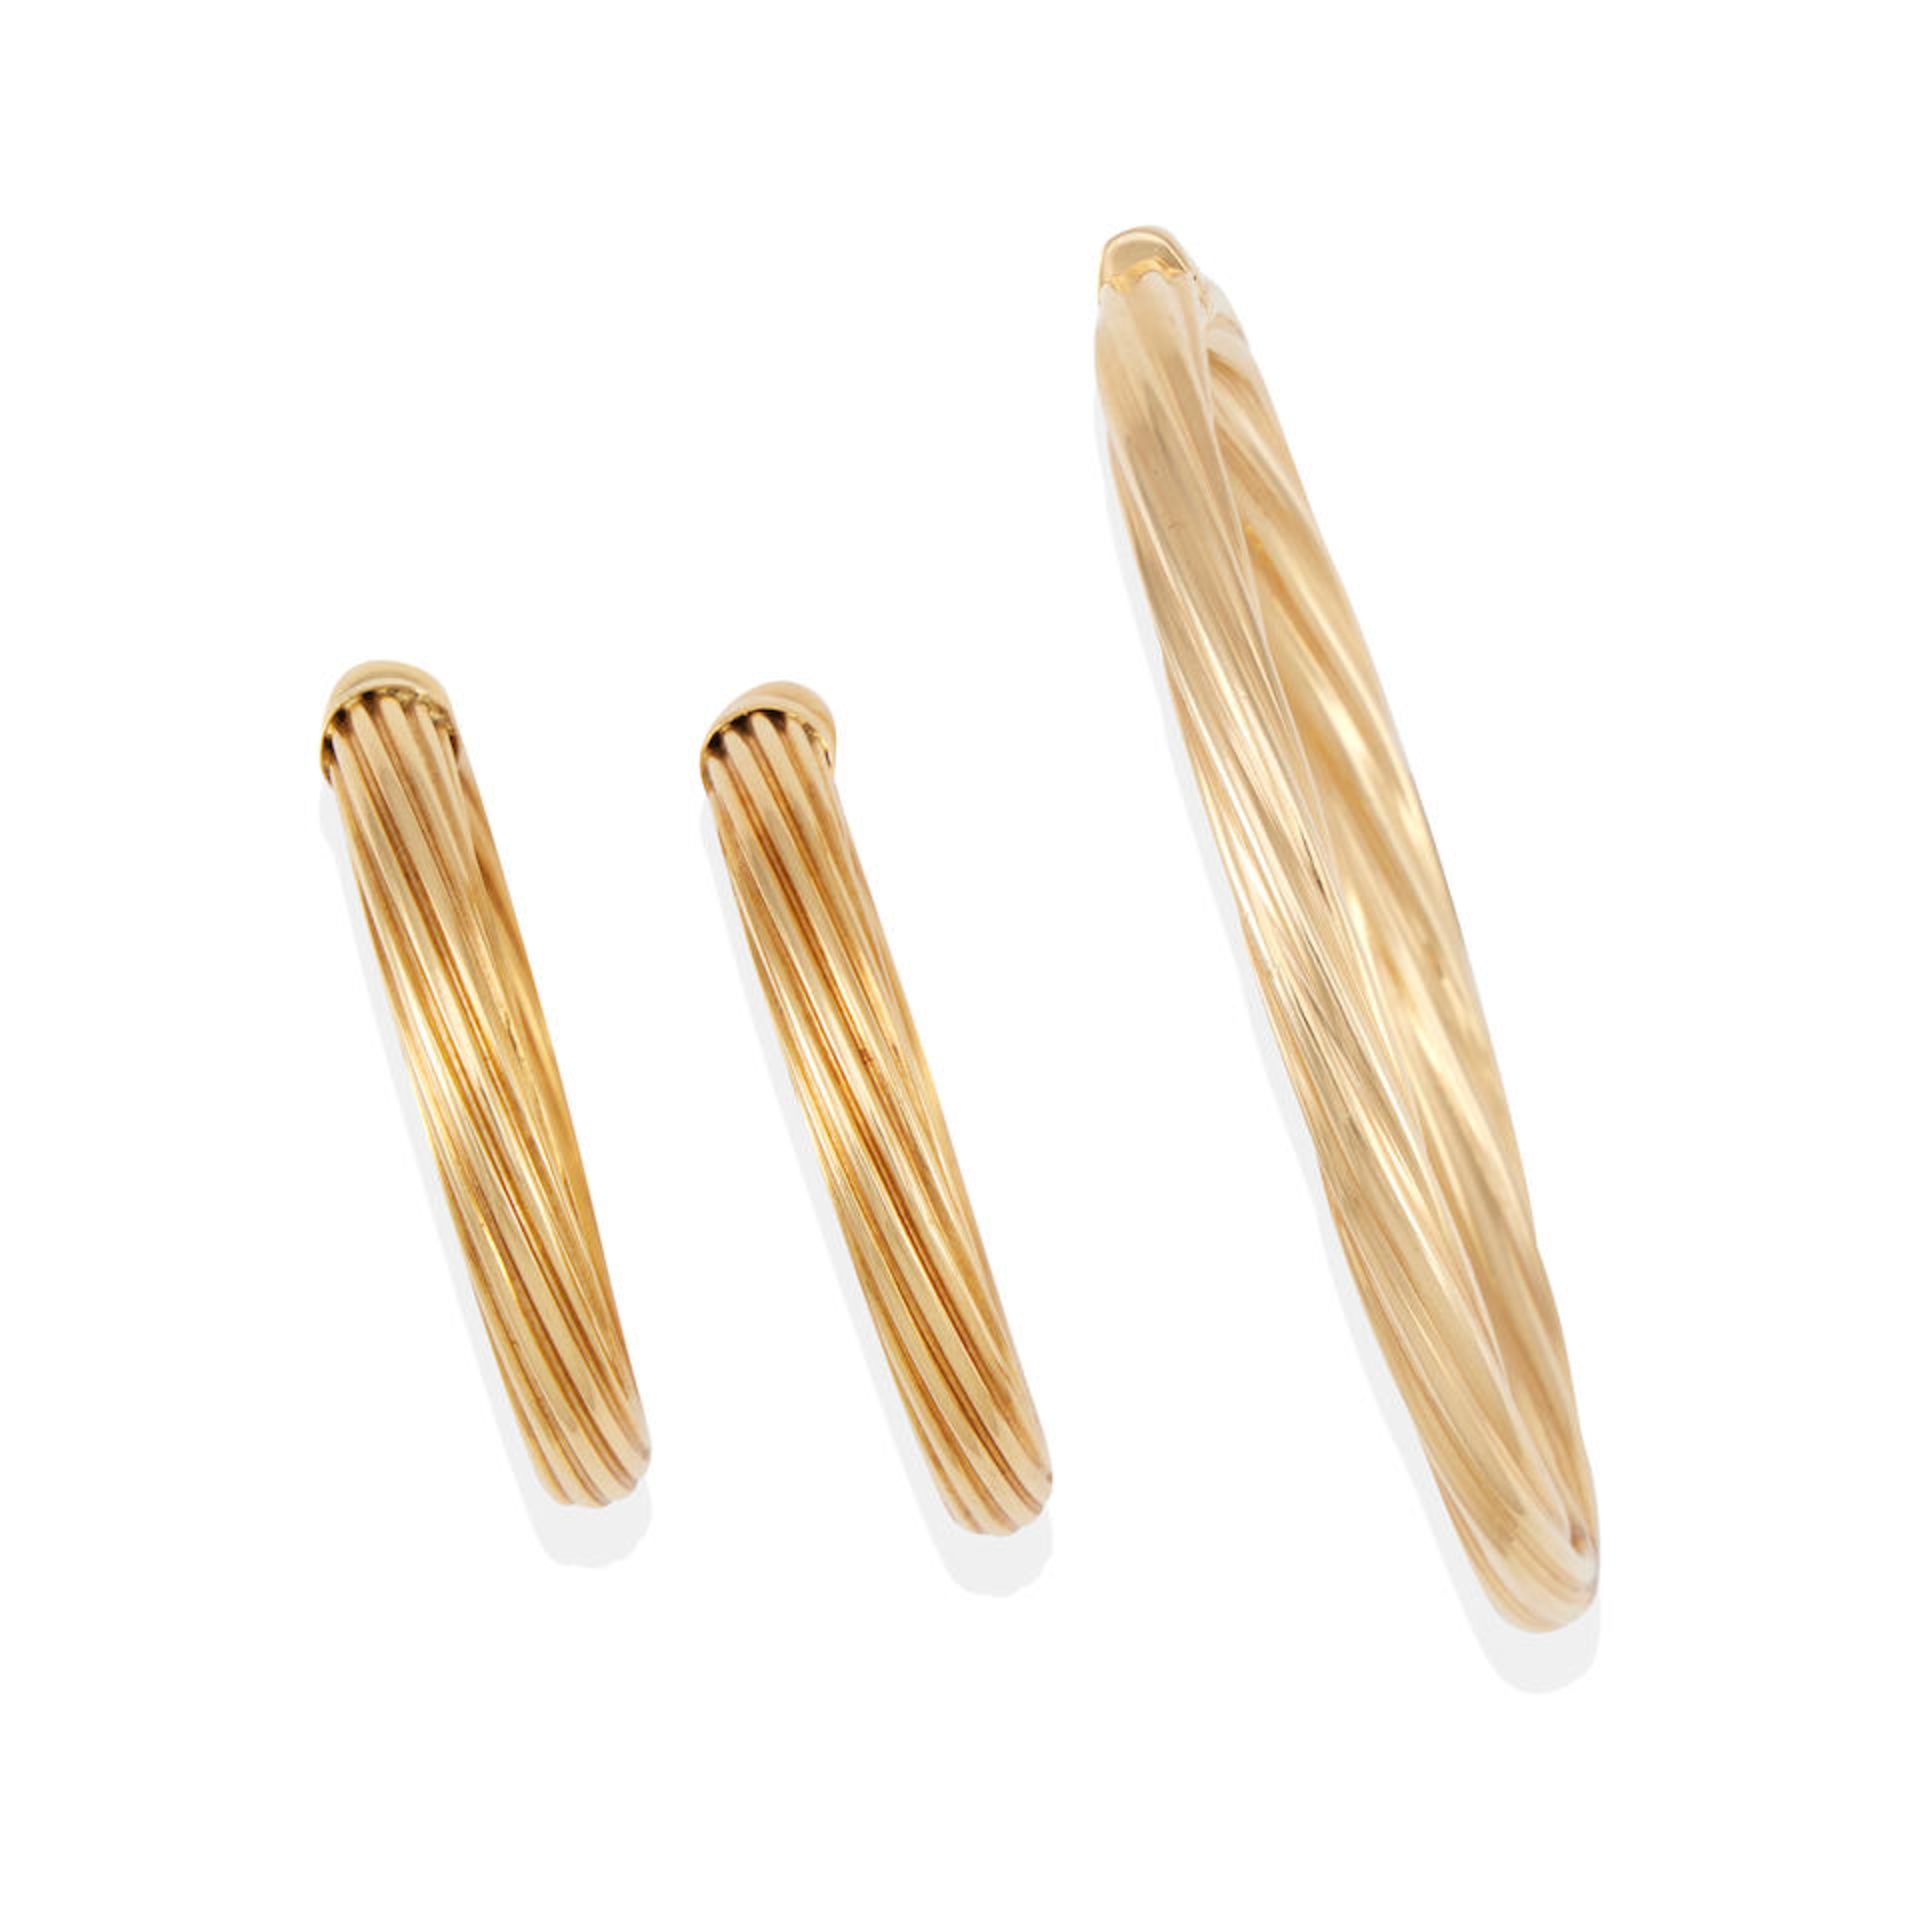 A 14K GOLD BANGLE BRACELET AND A PAIR OF 18K GOLD HOOP EARCLIPS